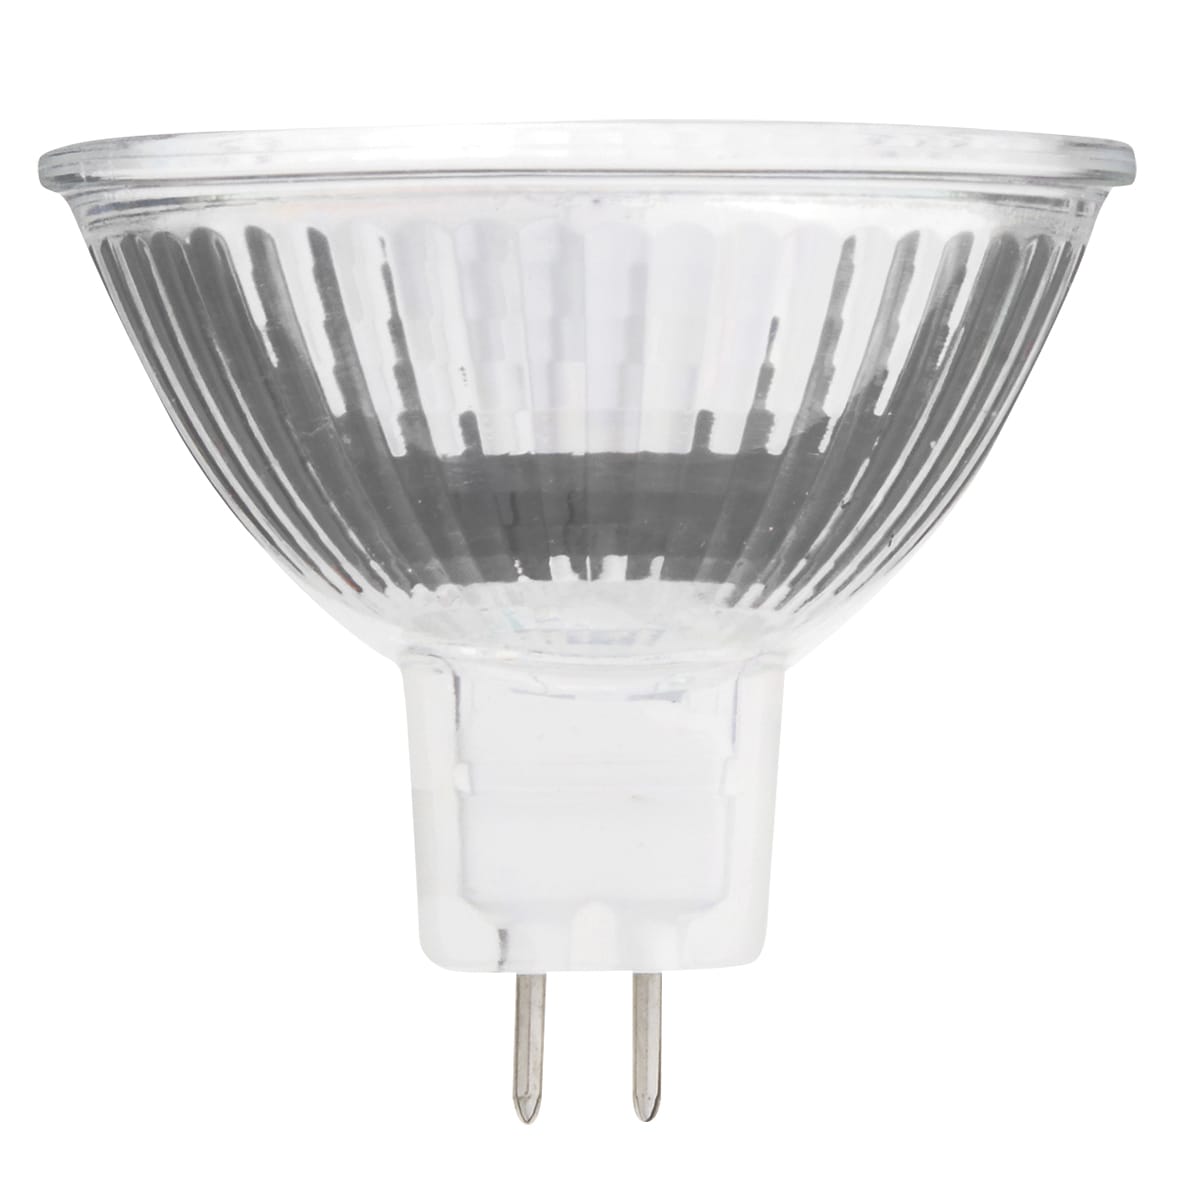 Landscape Gardening Halogen Bulb 14W Dimmable Low Voltage Warm White 24 Pack 